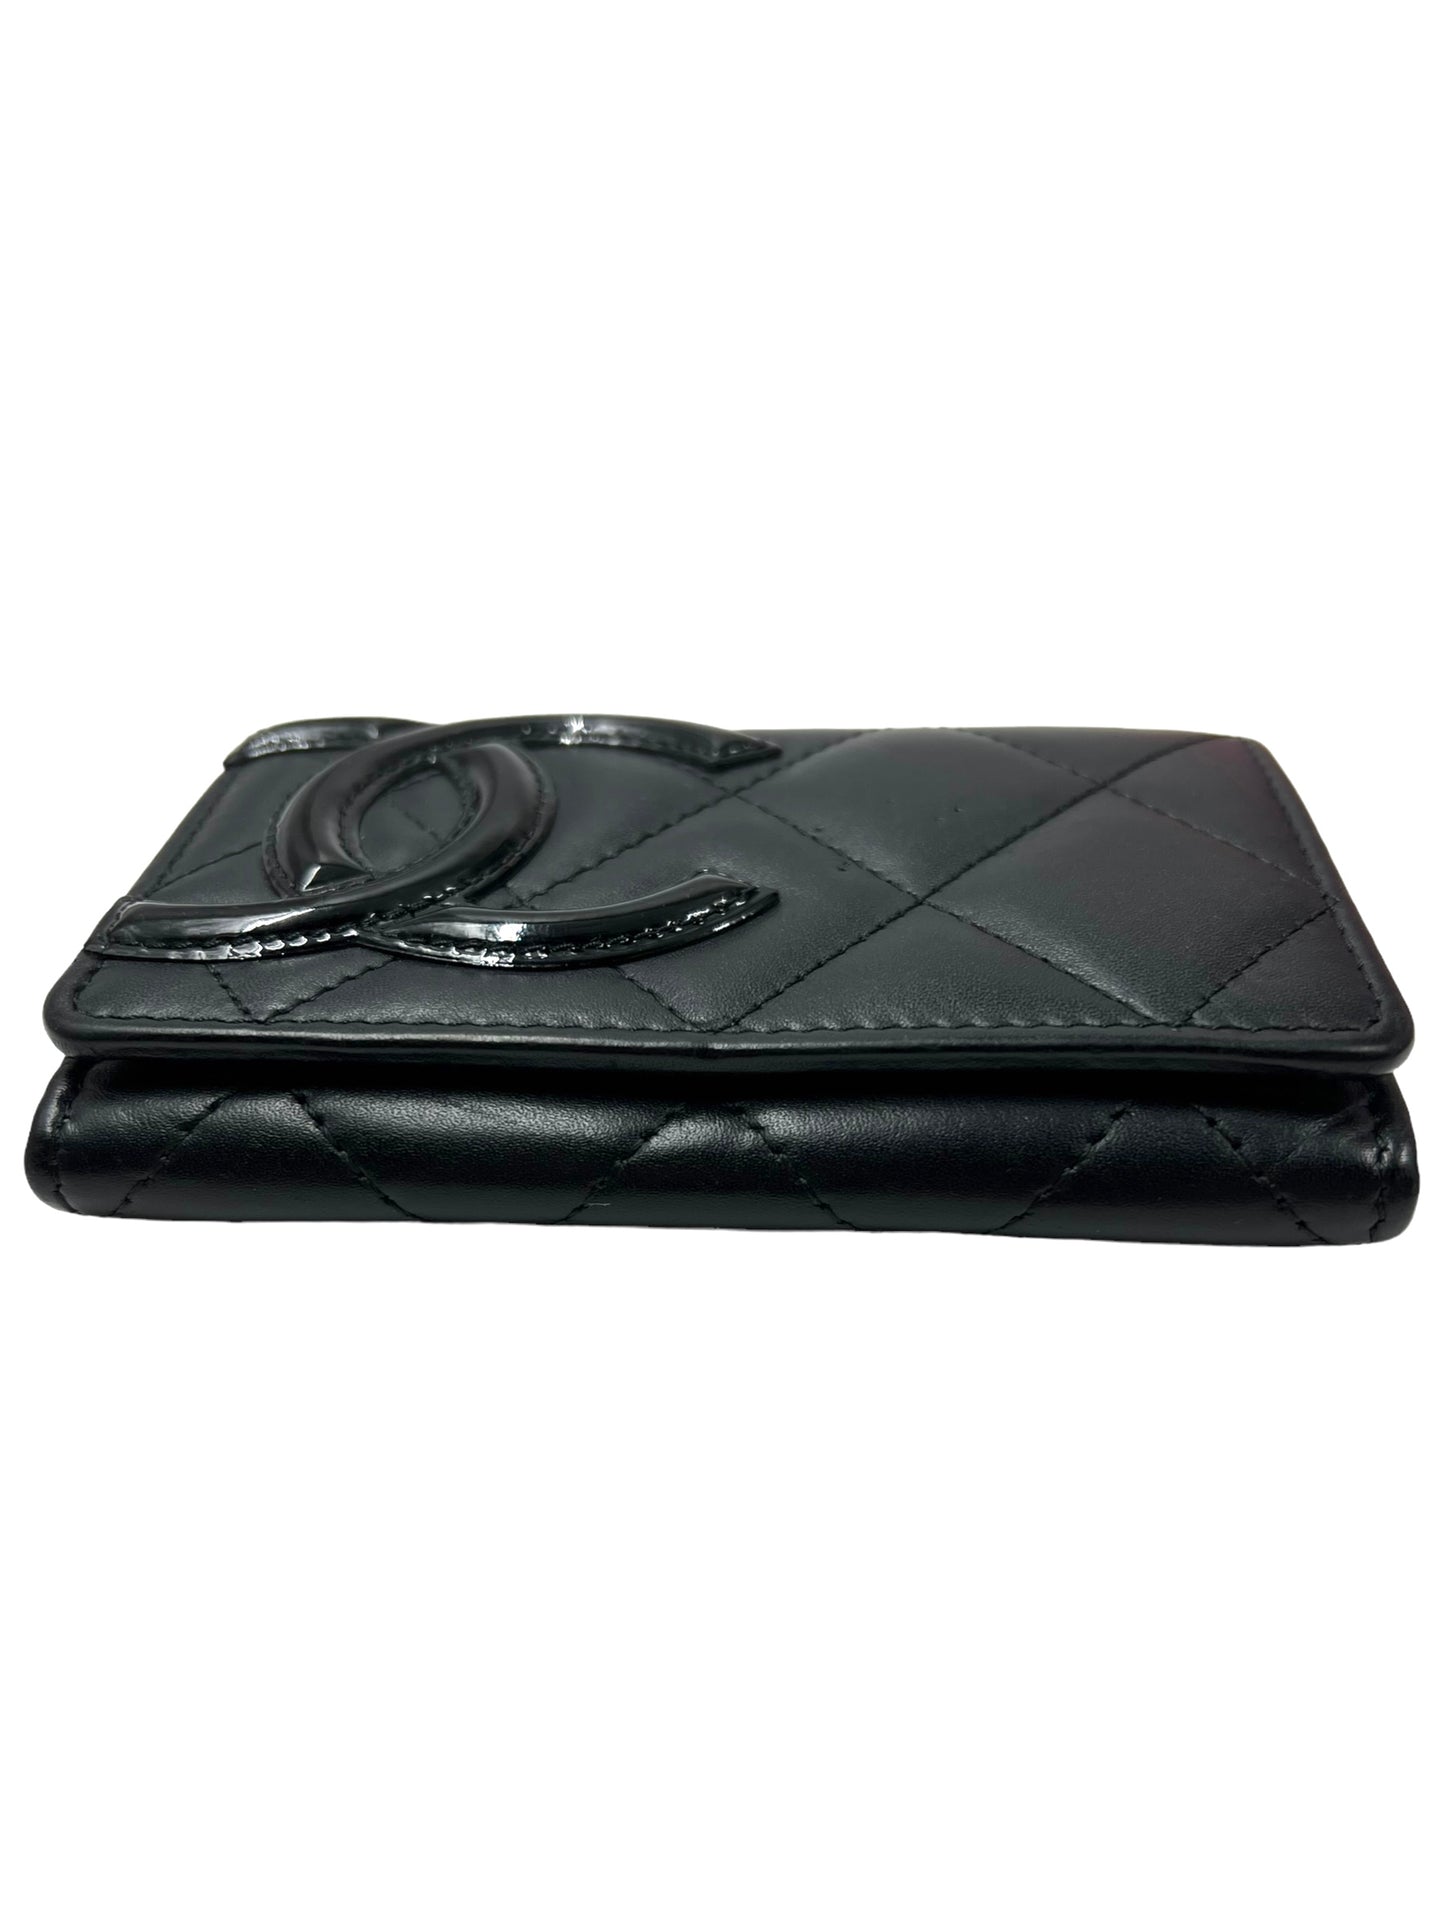 Chanel 2014 Black Quilted Lambskin Cambon Card Holder Wallet